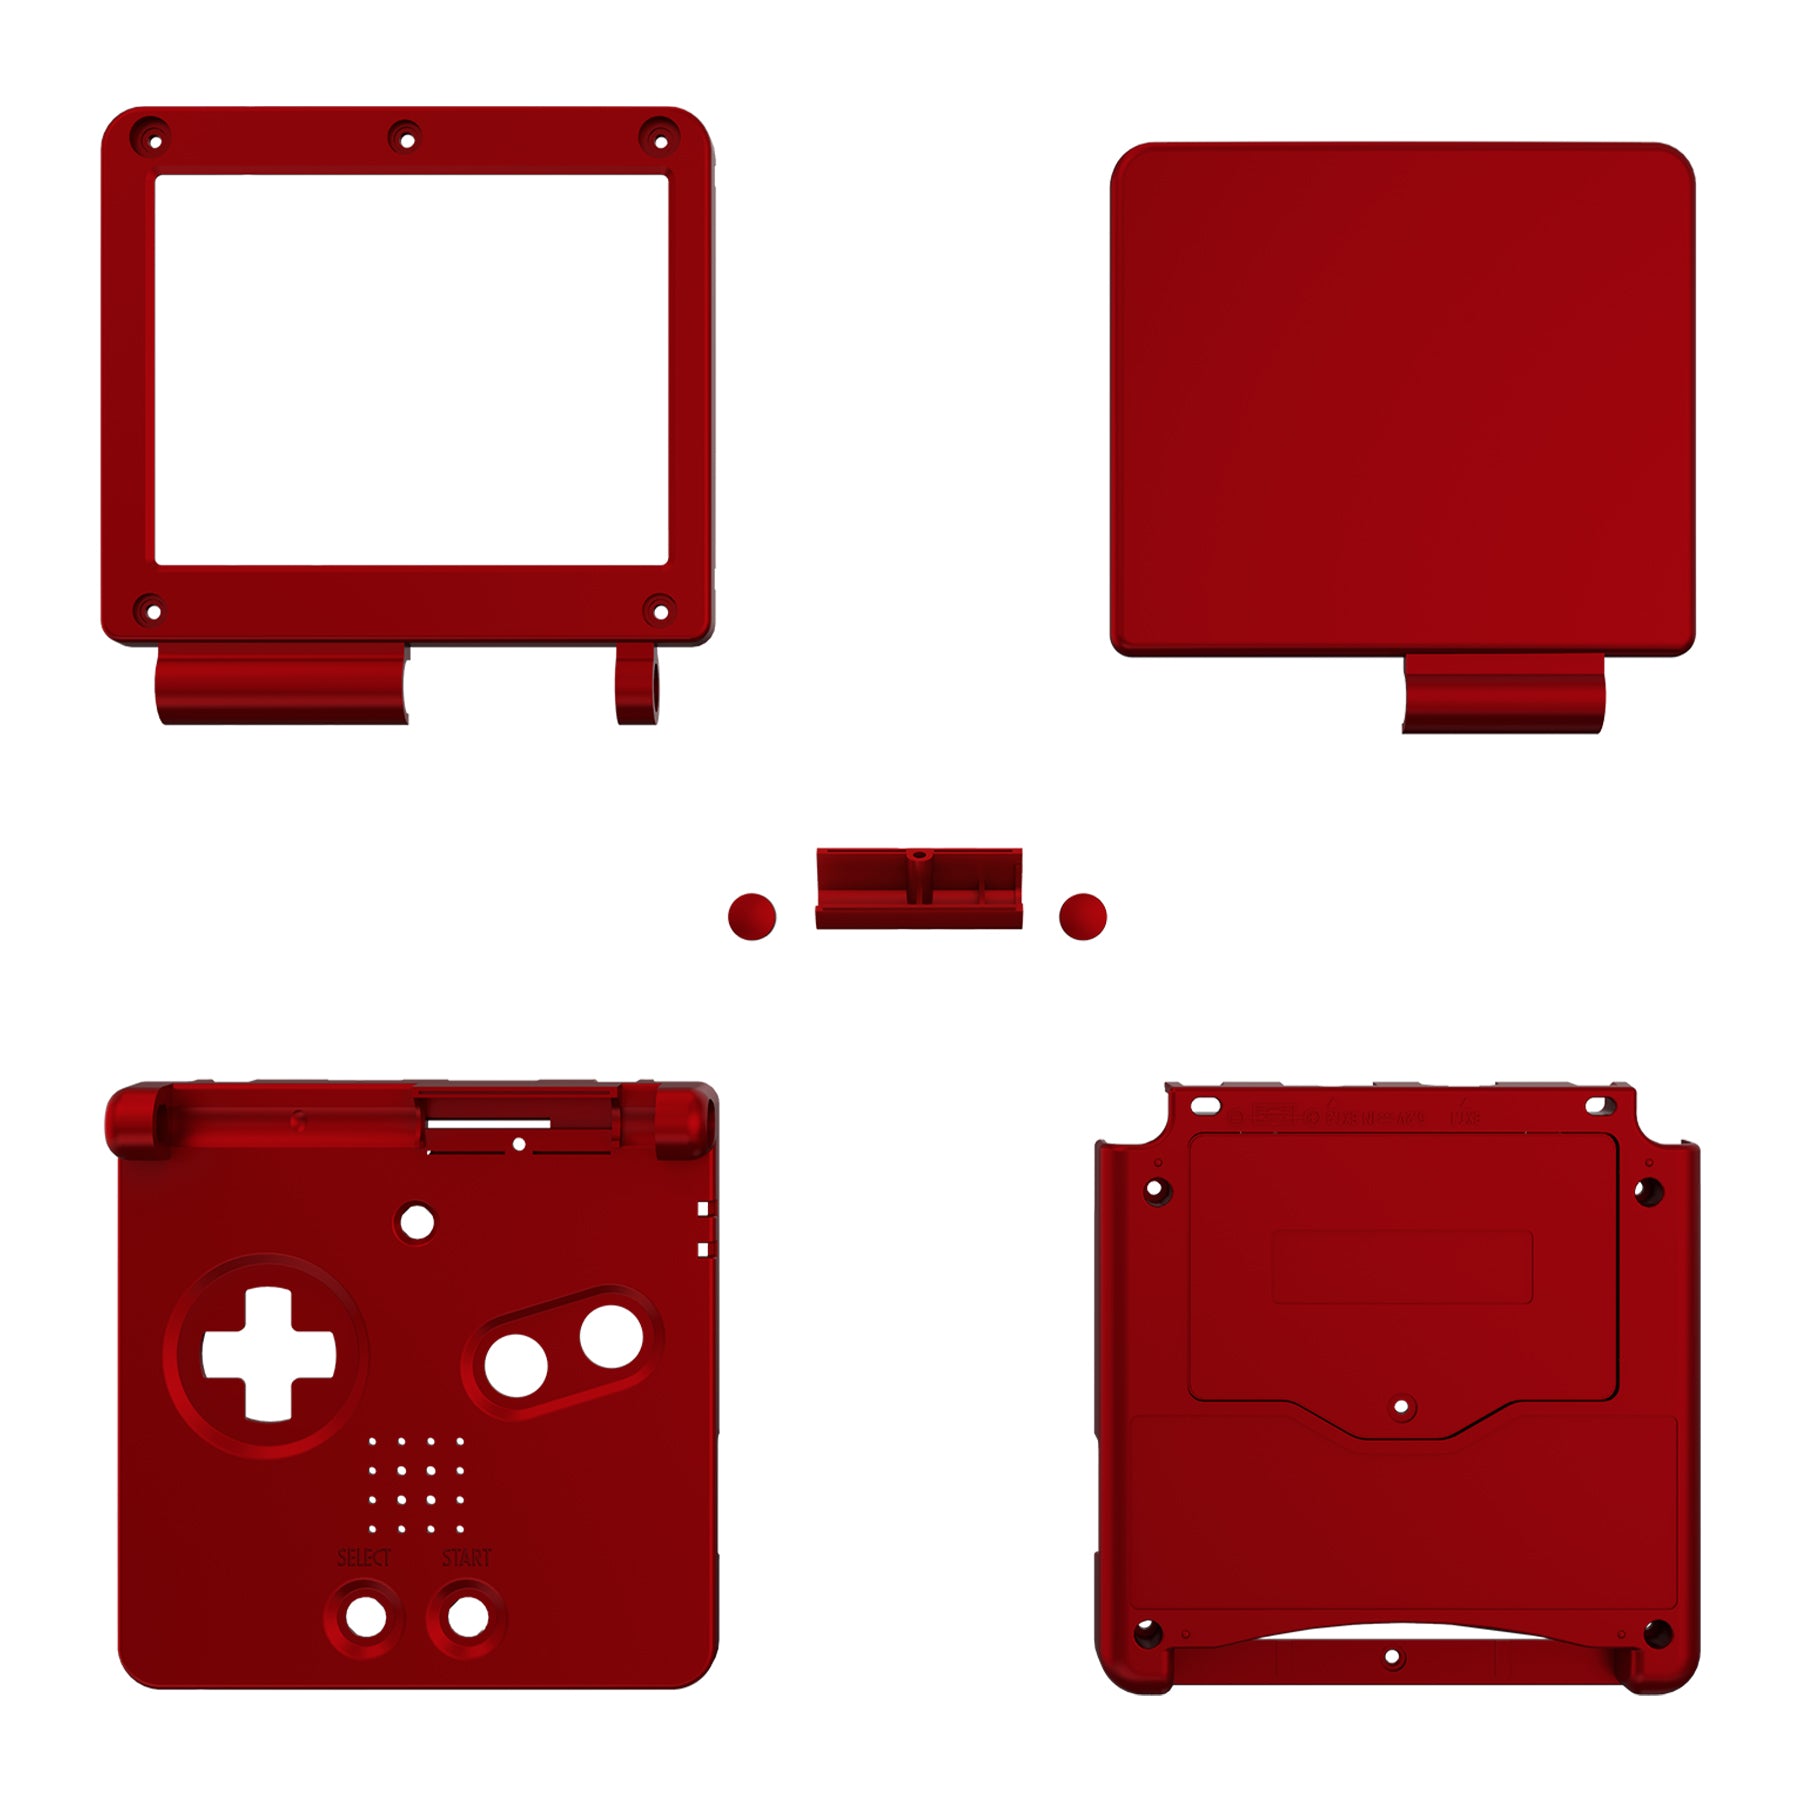 eXtremeRate Retail IPS Ready Upgraded Scarlet Red Soft Touch Custom Replacement Housing Shell for Gameboy Advance SP GBA SP – Compatible with Both IPS & Standard LCD – Console & Screen NOT Included - ASPP3004